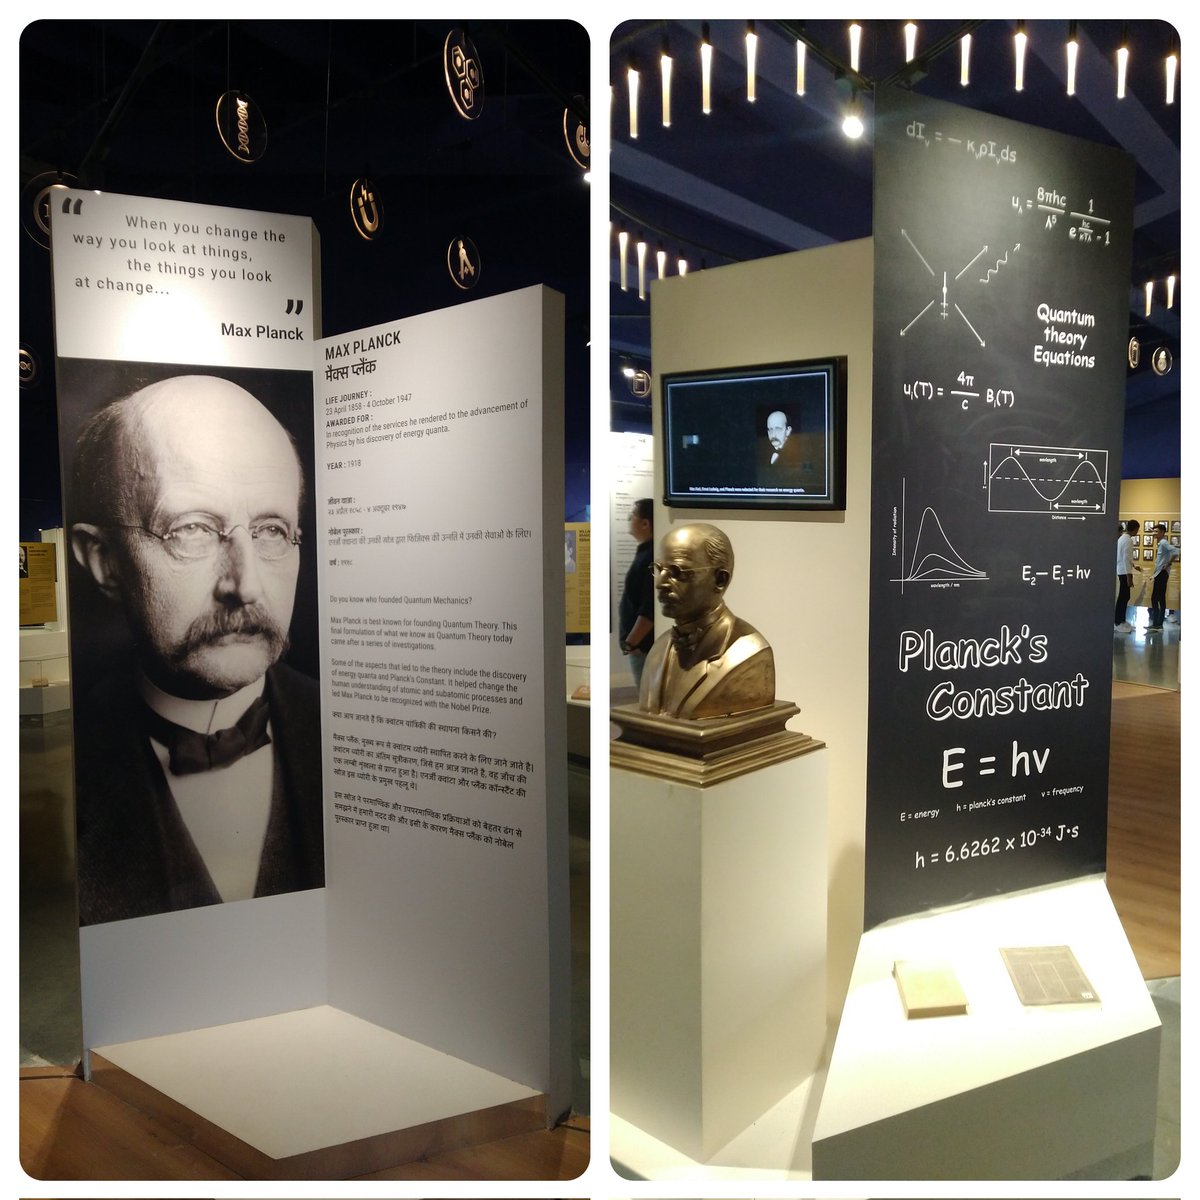 #HappyBirthday #MaxPlanck, the pioneer of #QuantumTheory, which revolutionized our understanding of #Matter & #Energy, paving the way for many #scientific #discoveries. @RSCRajkot has a dedicated #exhibit of him in #NoblePrize #Physics Gallery.
@vnehra @narottamsahoo @InfoGujcost